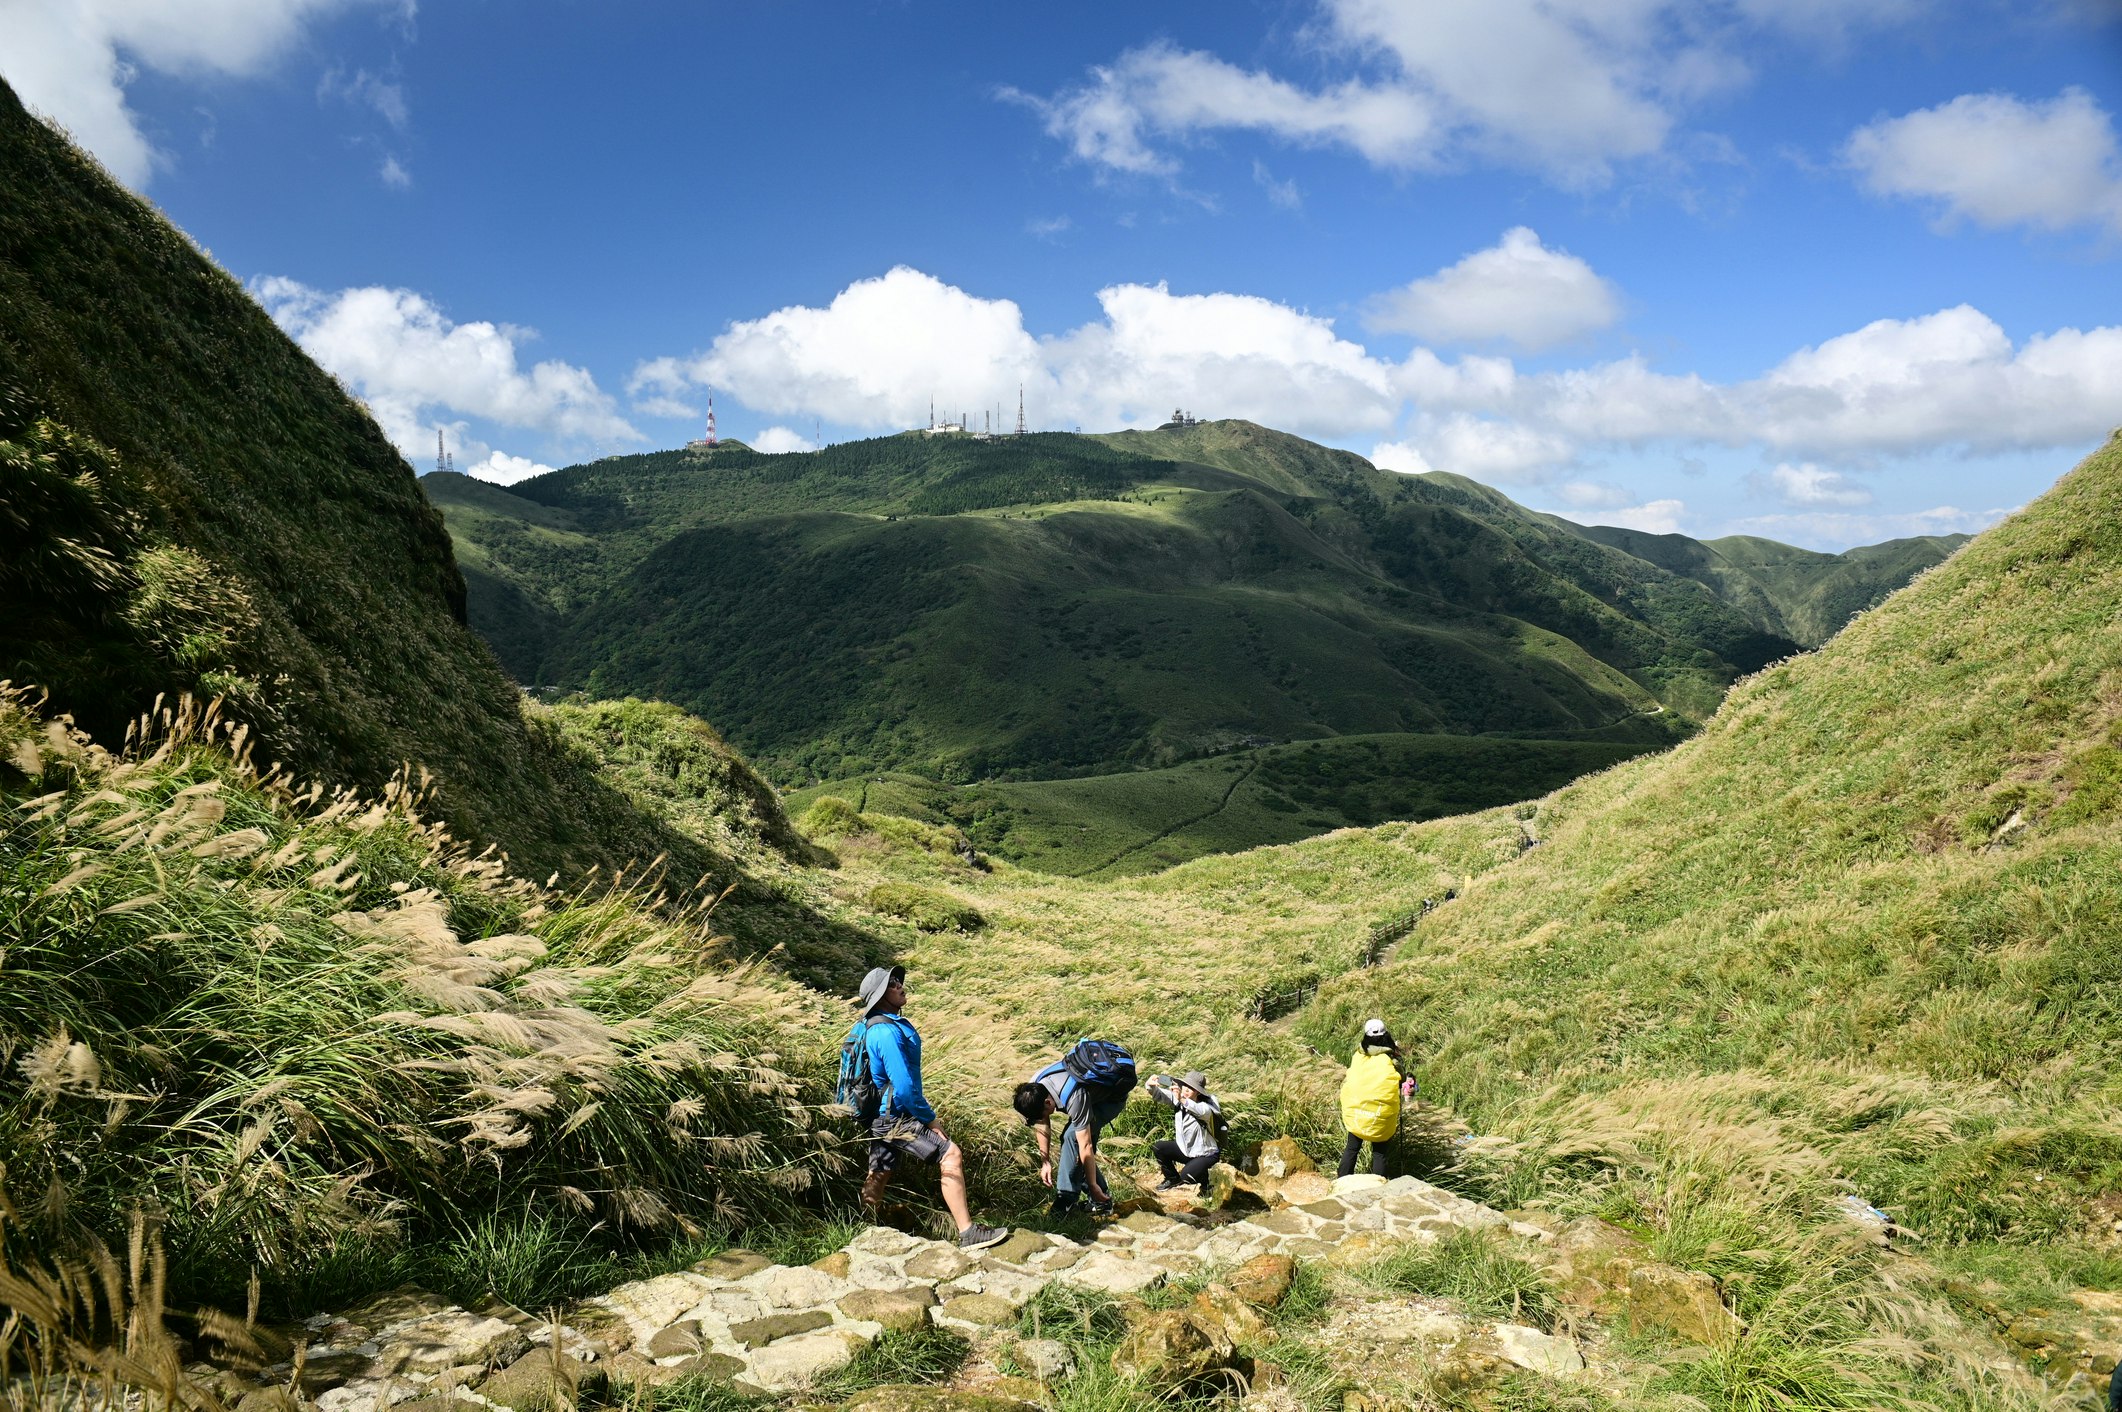 A group of friends stop to admire the view mid-hike in Yangmingshan National Park